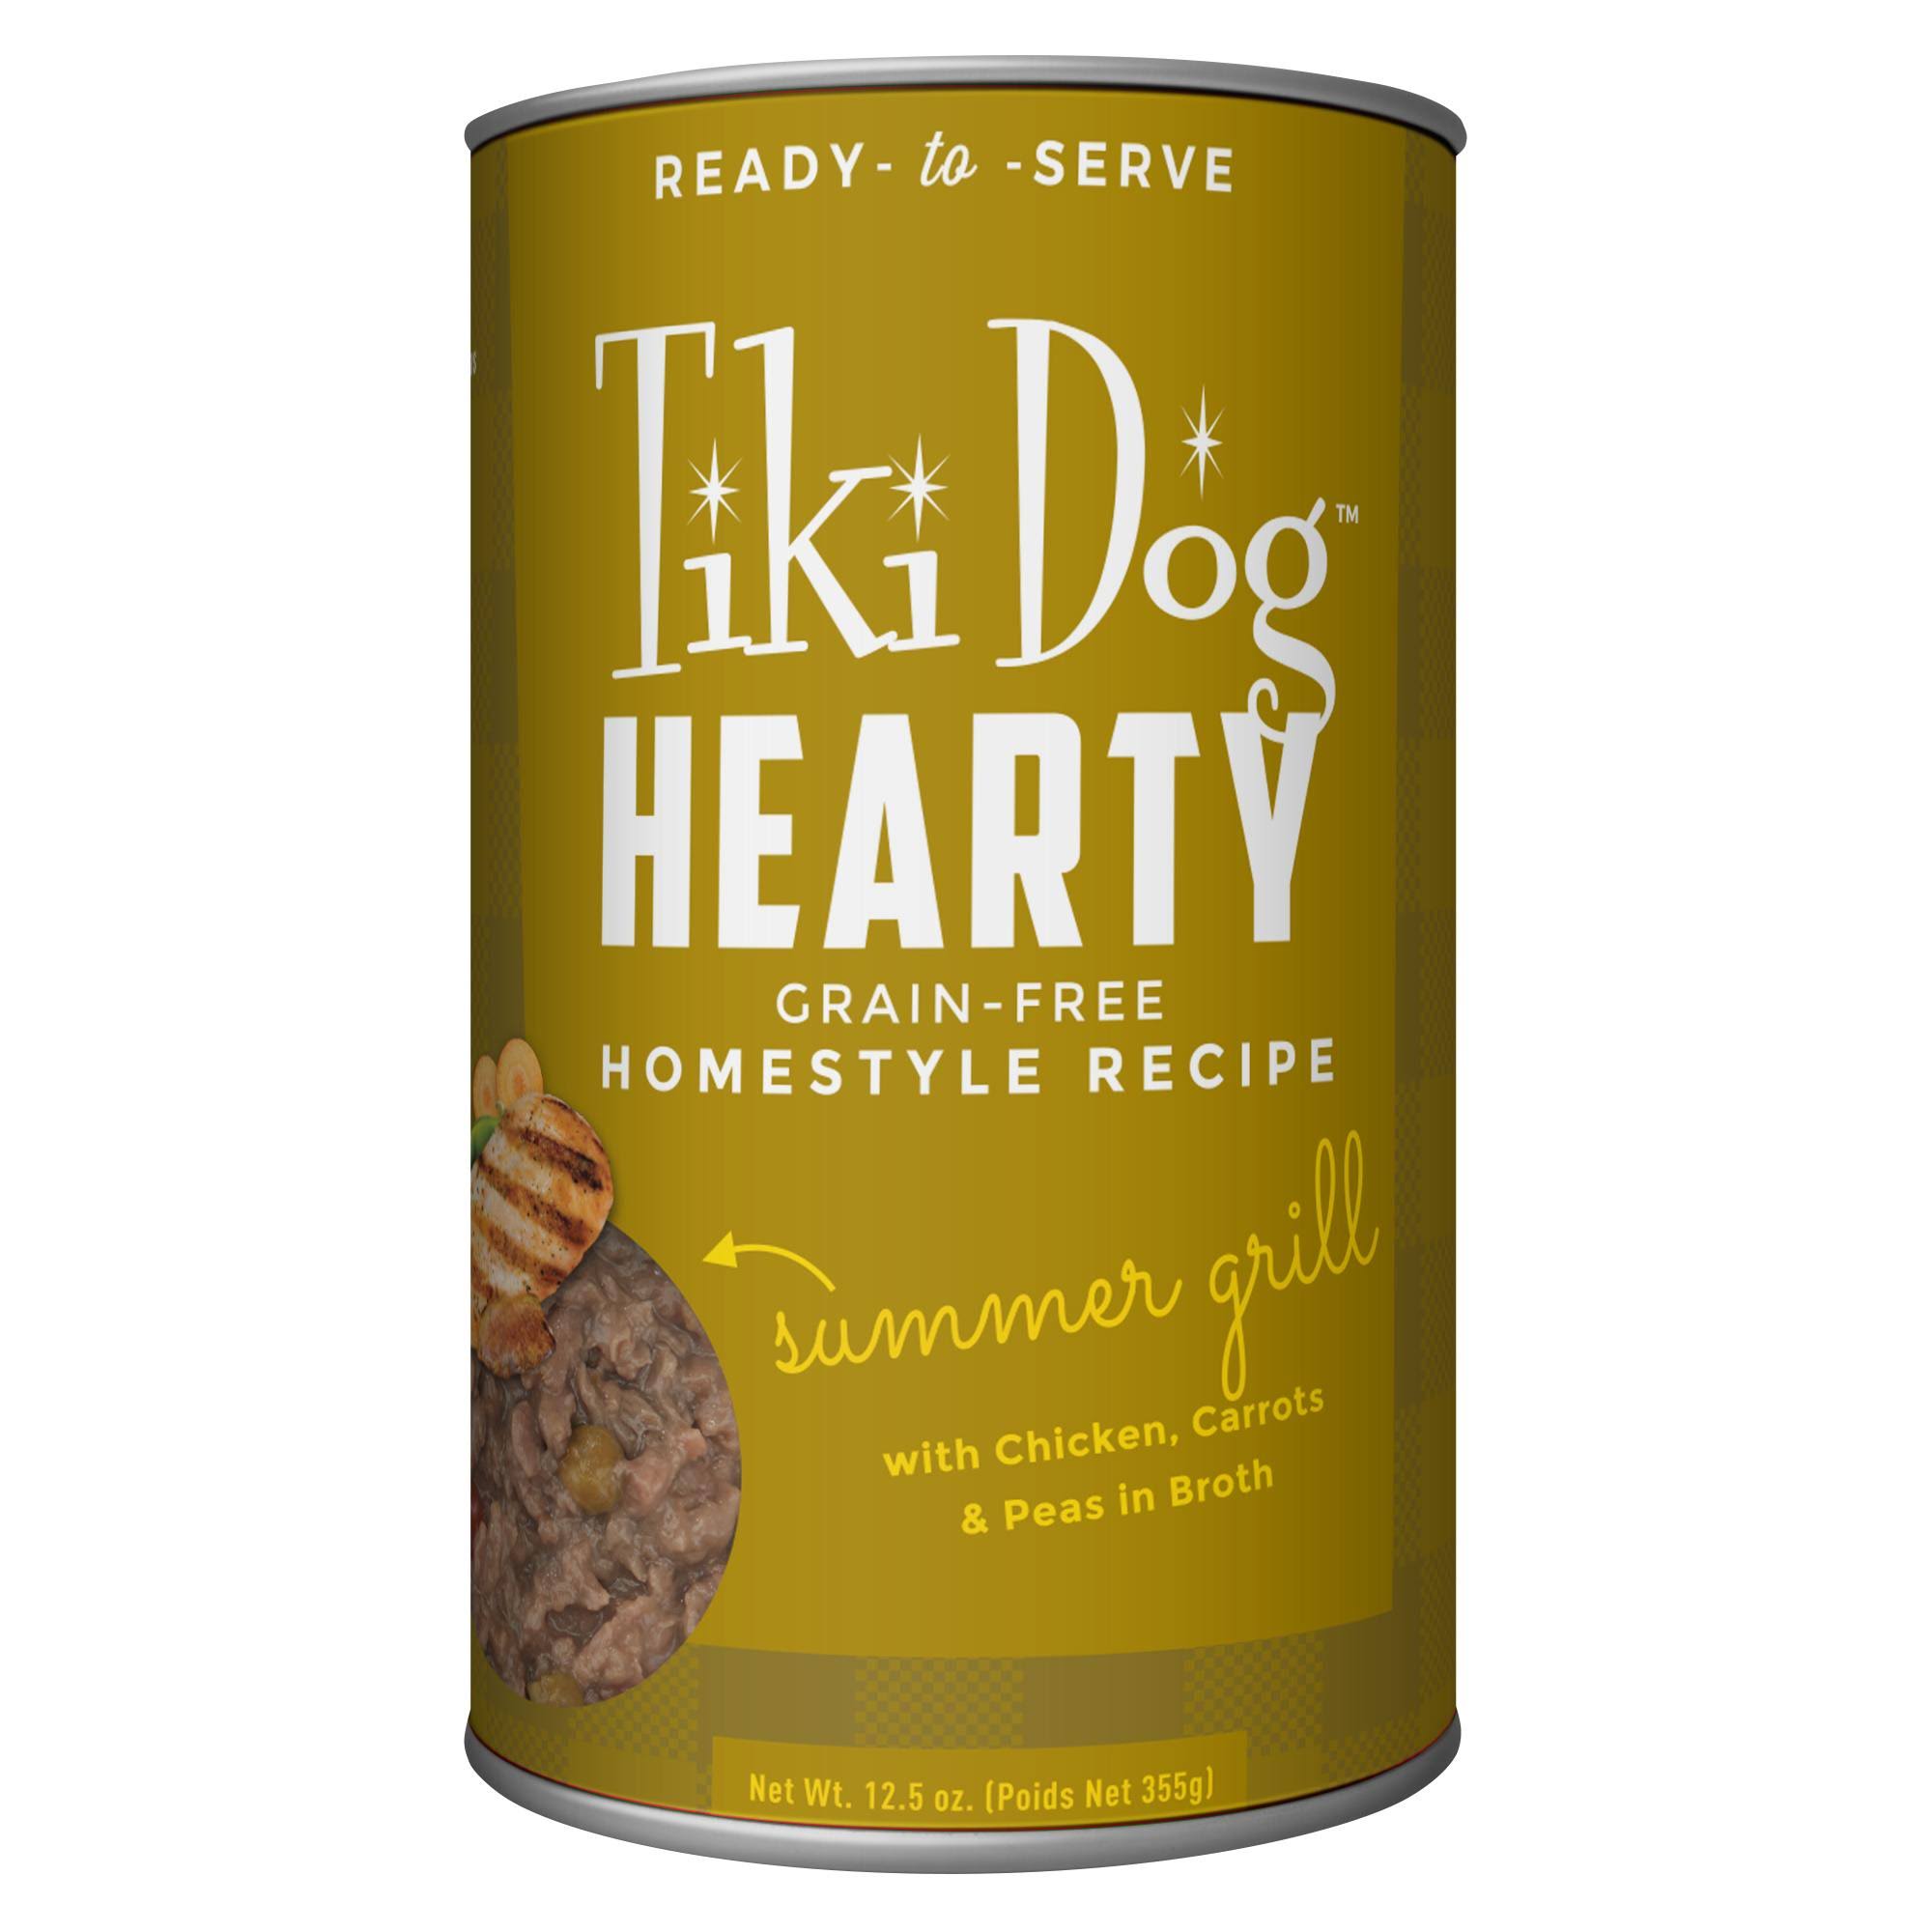 Tiki Pet Hearty Homestyle Recipe Canned Dog Food 12.5oz Exclusive at Hearty Chicken 12.5oz